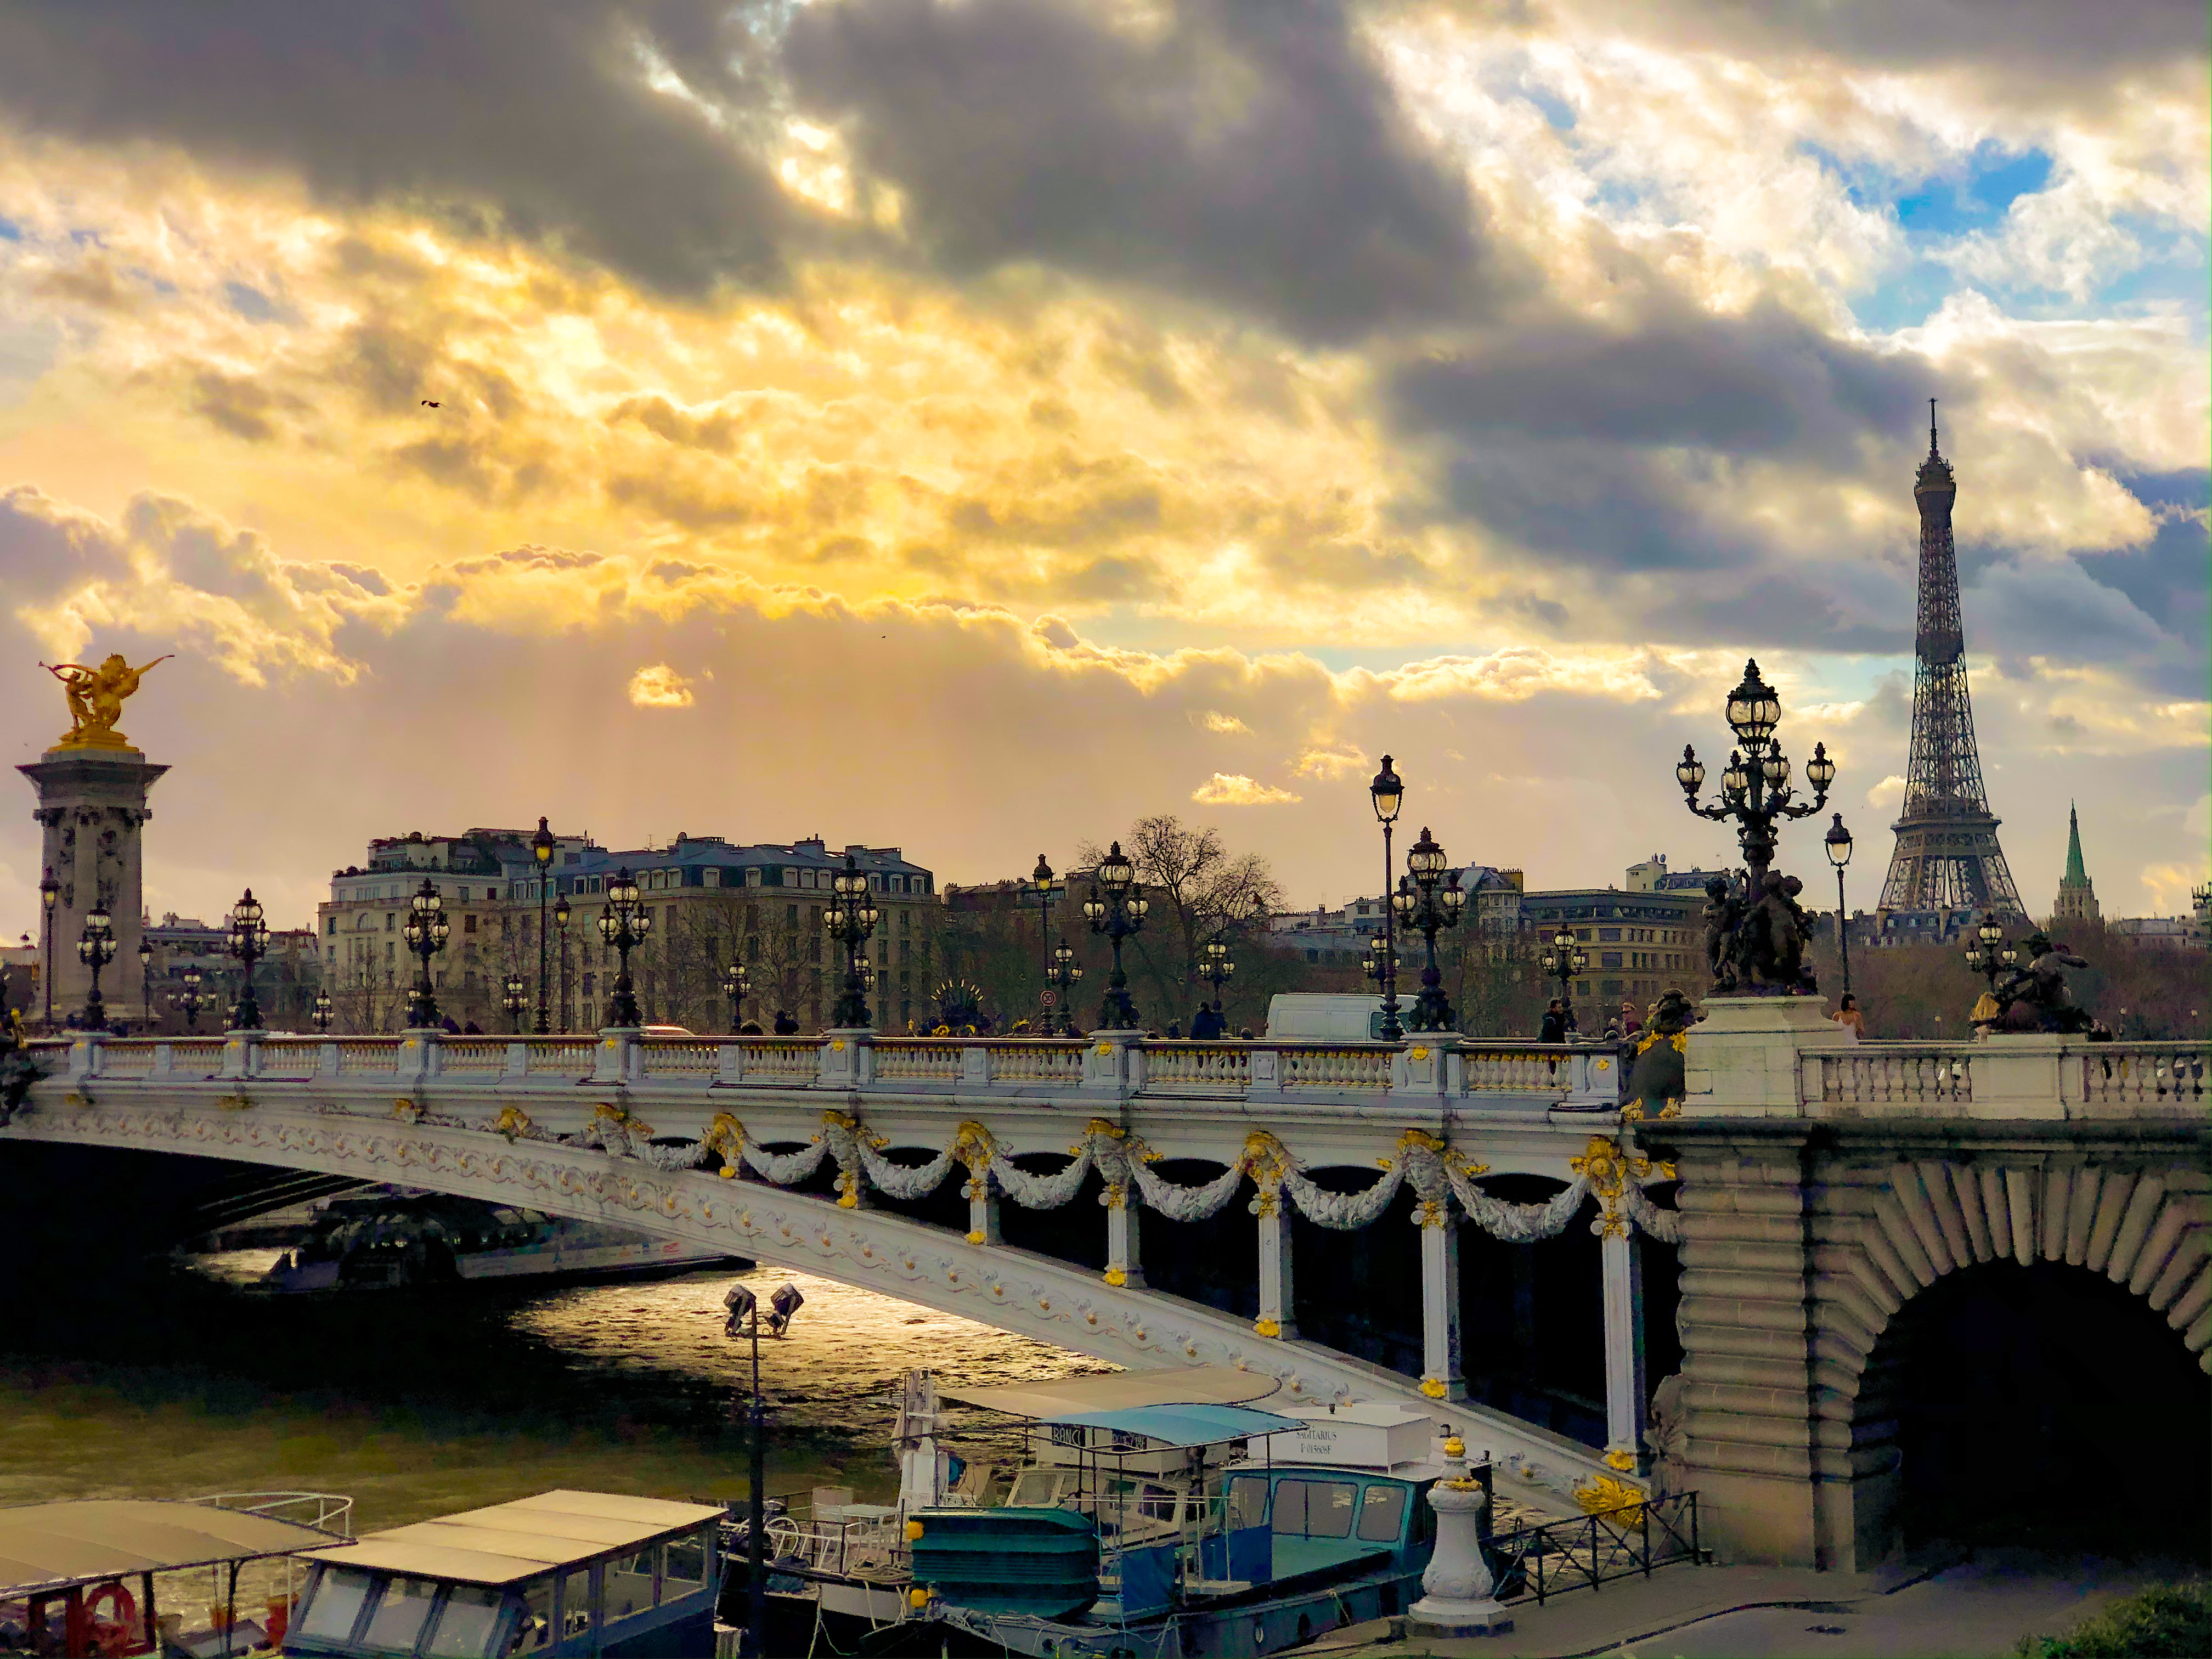 The Seine and a bridge at dusk, with the Eiffel towel in the background is part of what HEC Paris MBA students see in Europe